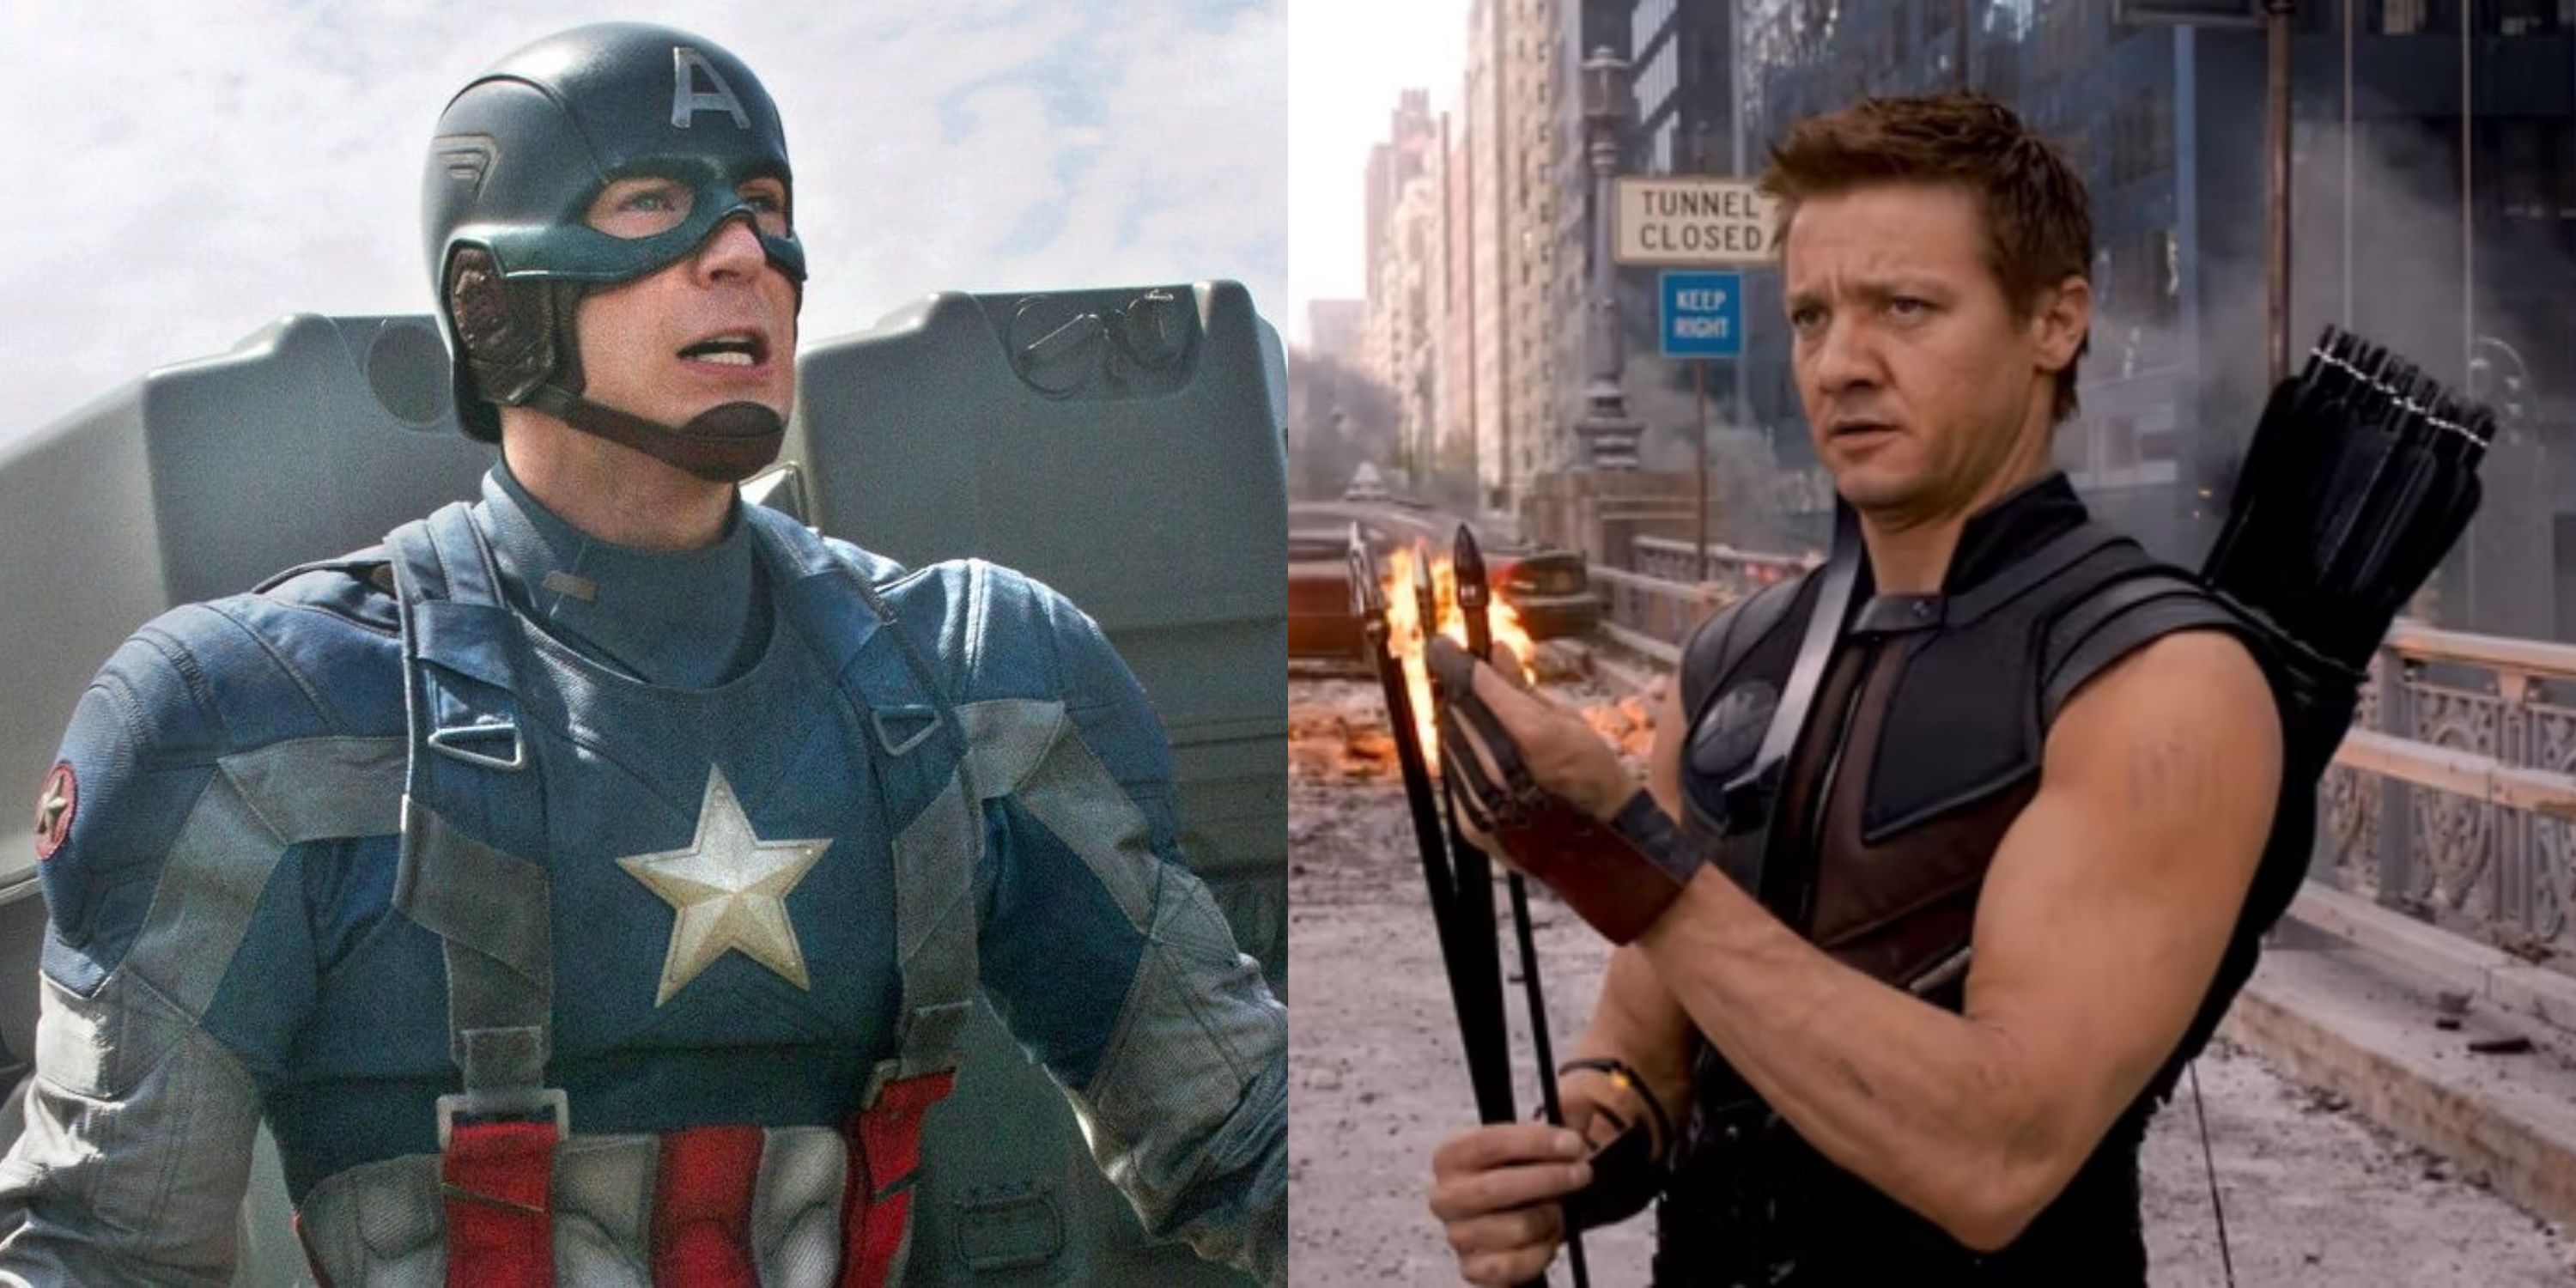 Featured image split Chris Evans as Steve Rogers in Captain America The Winter Soldier and Hawkeye in The Avengers 2012